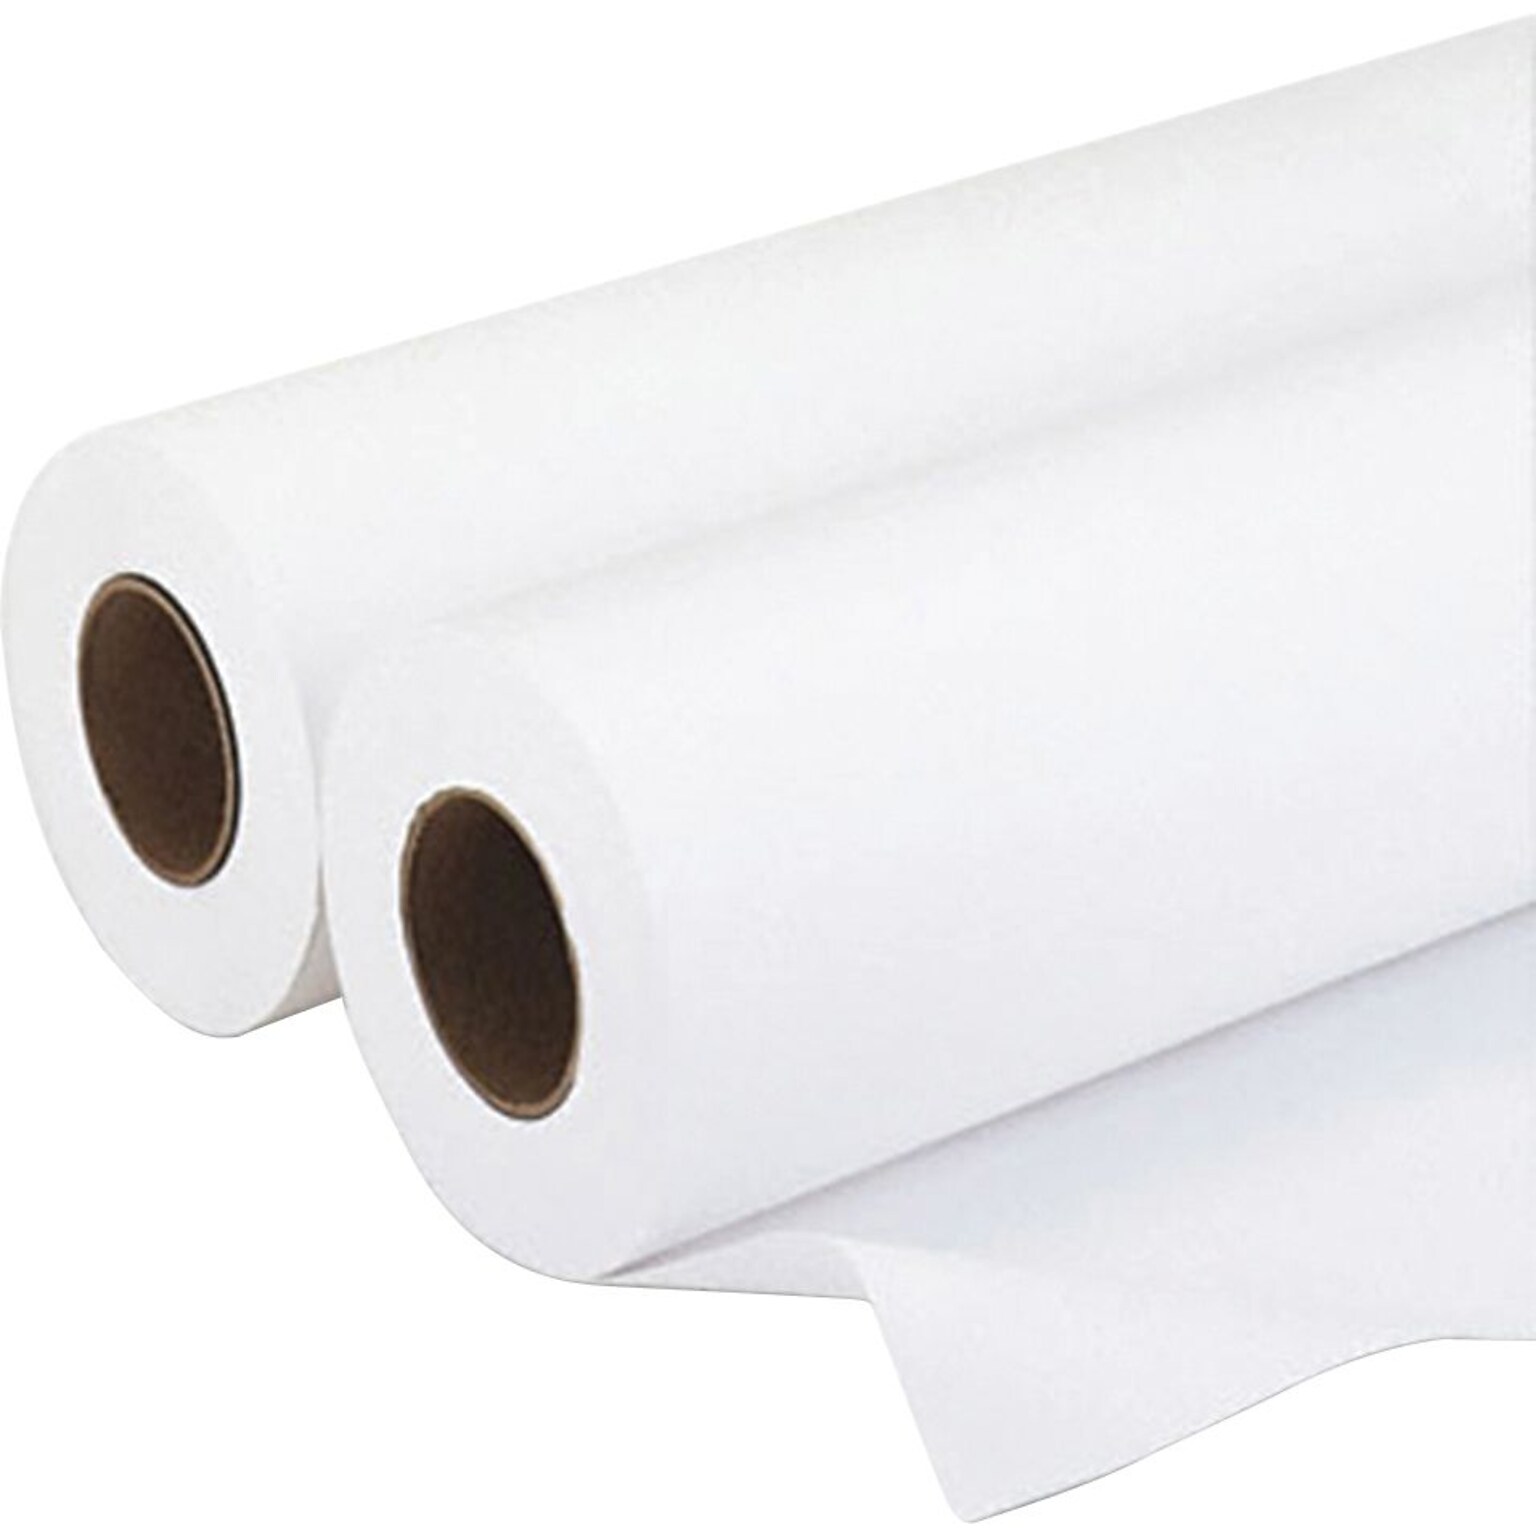 Alliance Freezer Paper, 40 lb. Bleached White with Polyethylene Coating, 18 x 1000, 1 Roll